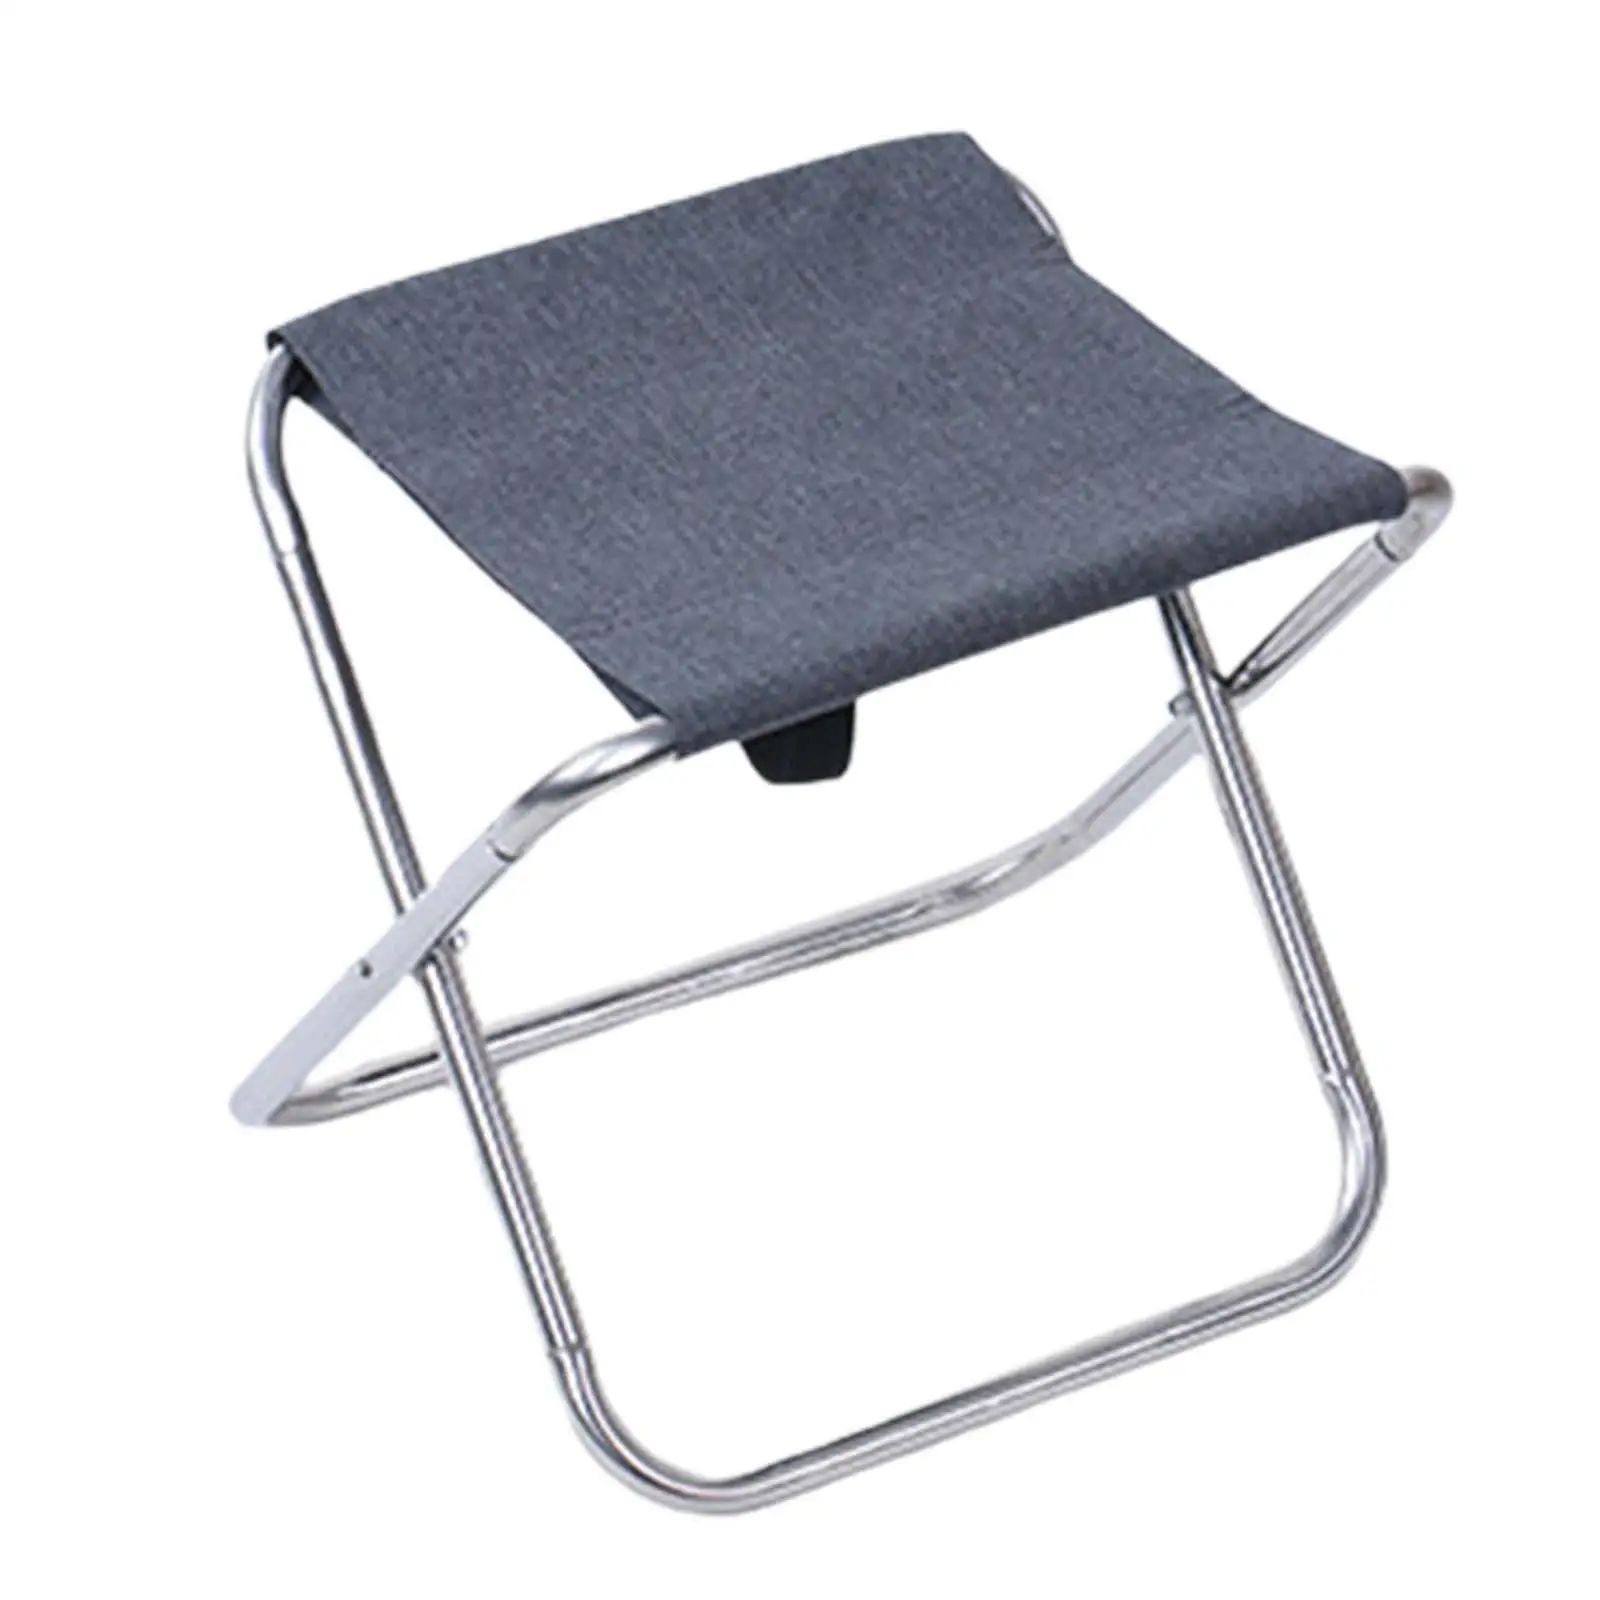 Folding Stool Camping Outdoor Reusable Fishing Seat Mini Camping Seat Adults Saddle Chair for Park Lawn Festival Patio